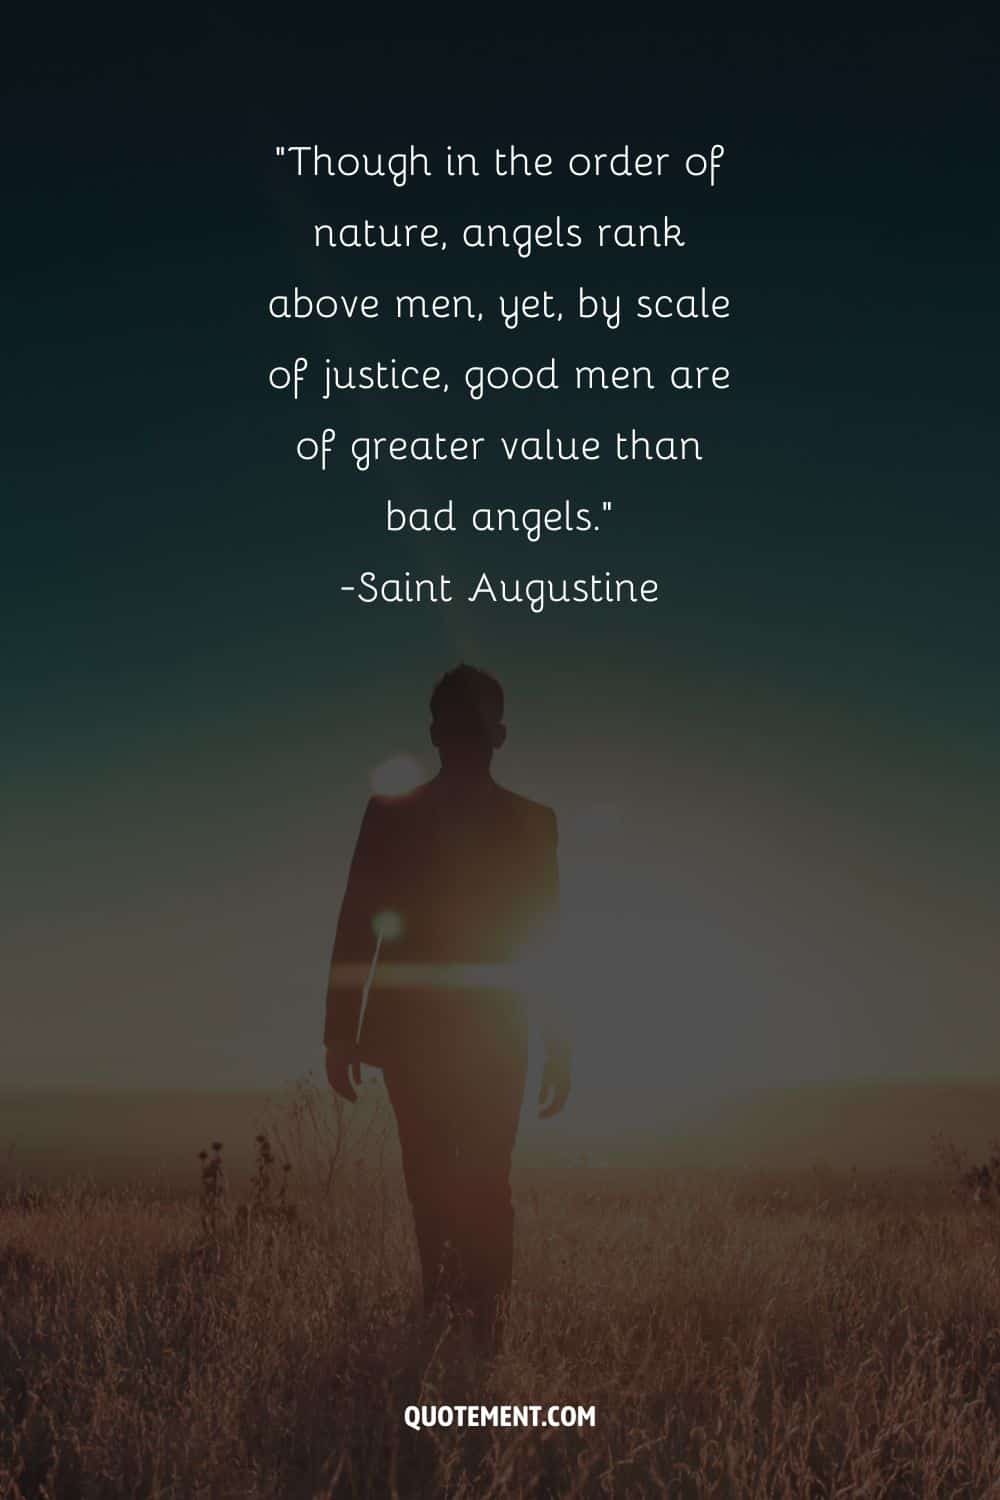 Though in the order of nature, angels rank above men, yet, by scale of justice, good men are of greater value than bad angels